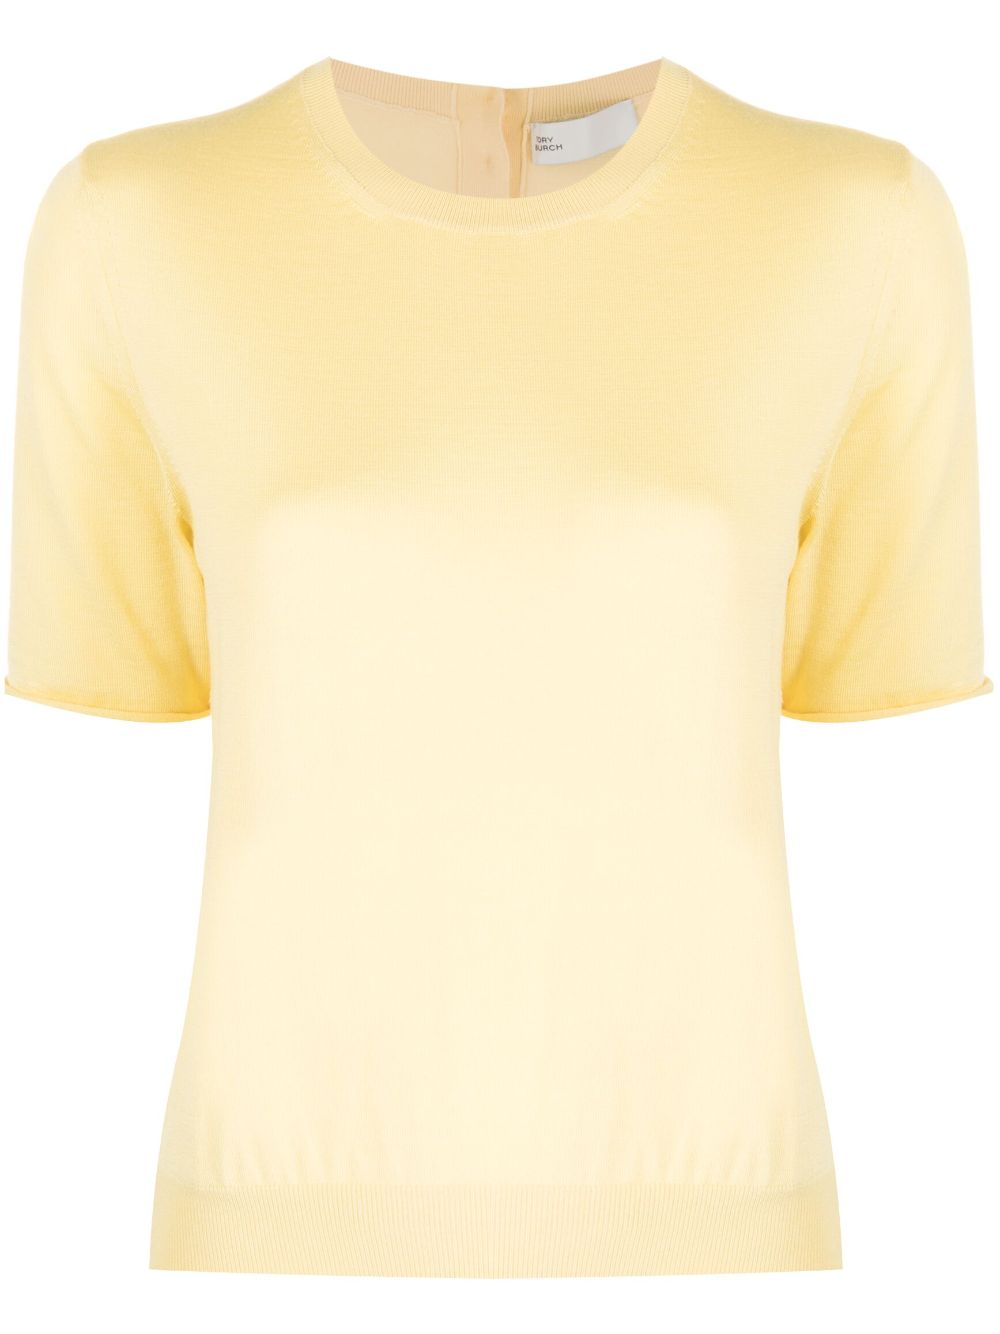 Image 1 of Tory Burch short-sleeve knitted top